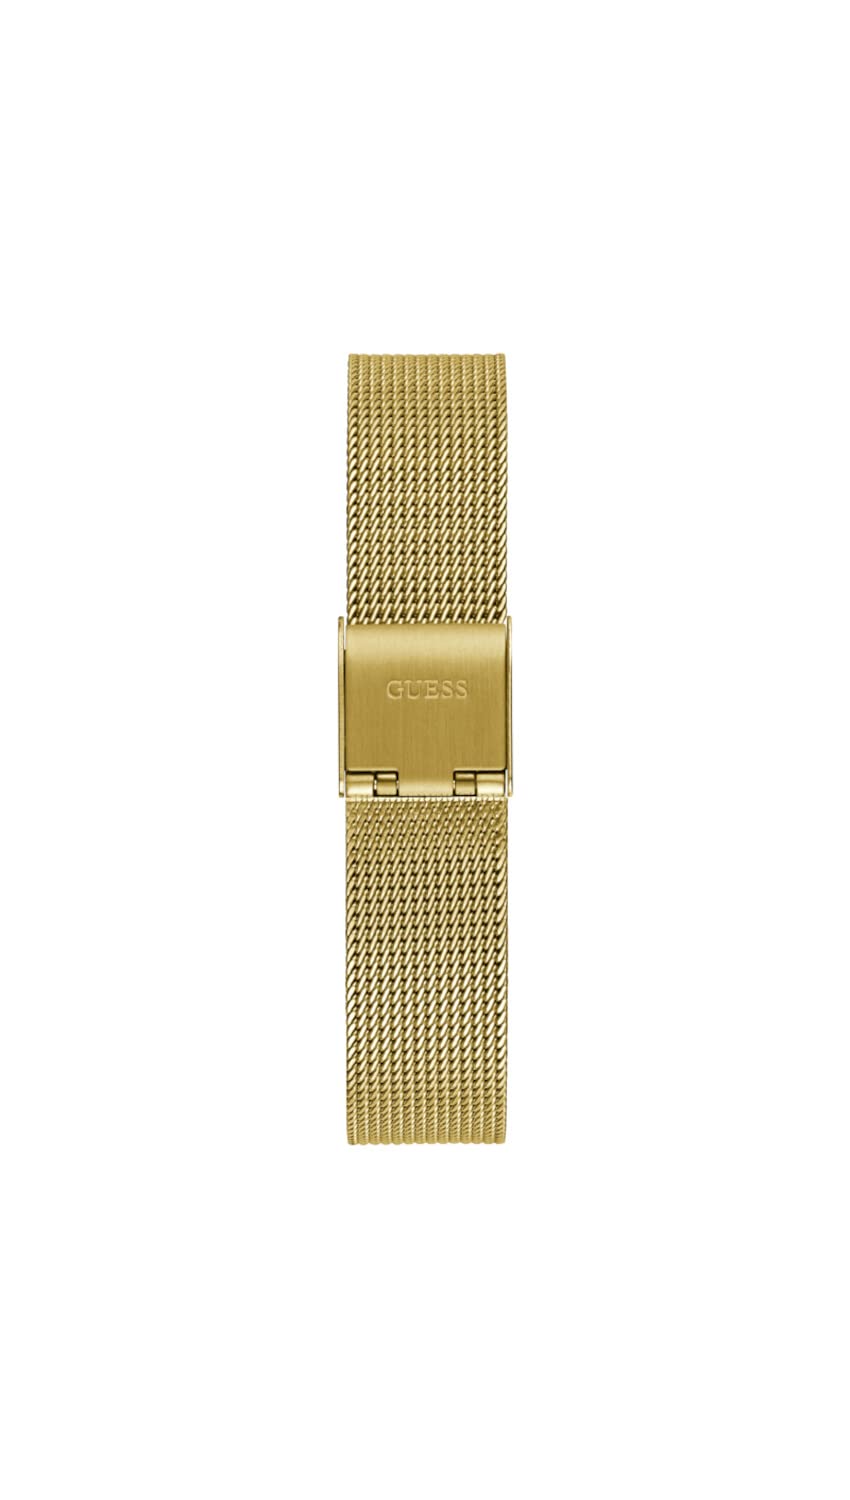 GUESS Ladies 28mm Watch - Gold Tone Strap White Dial Gold Tone Case